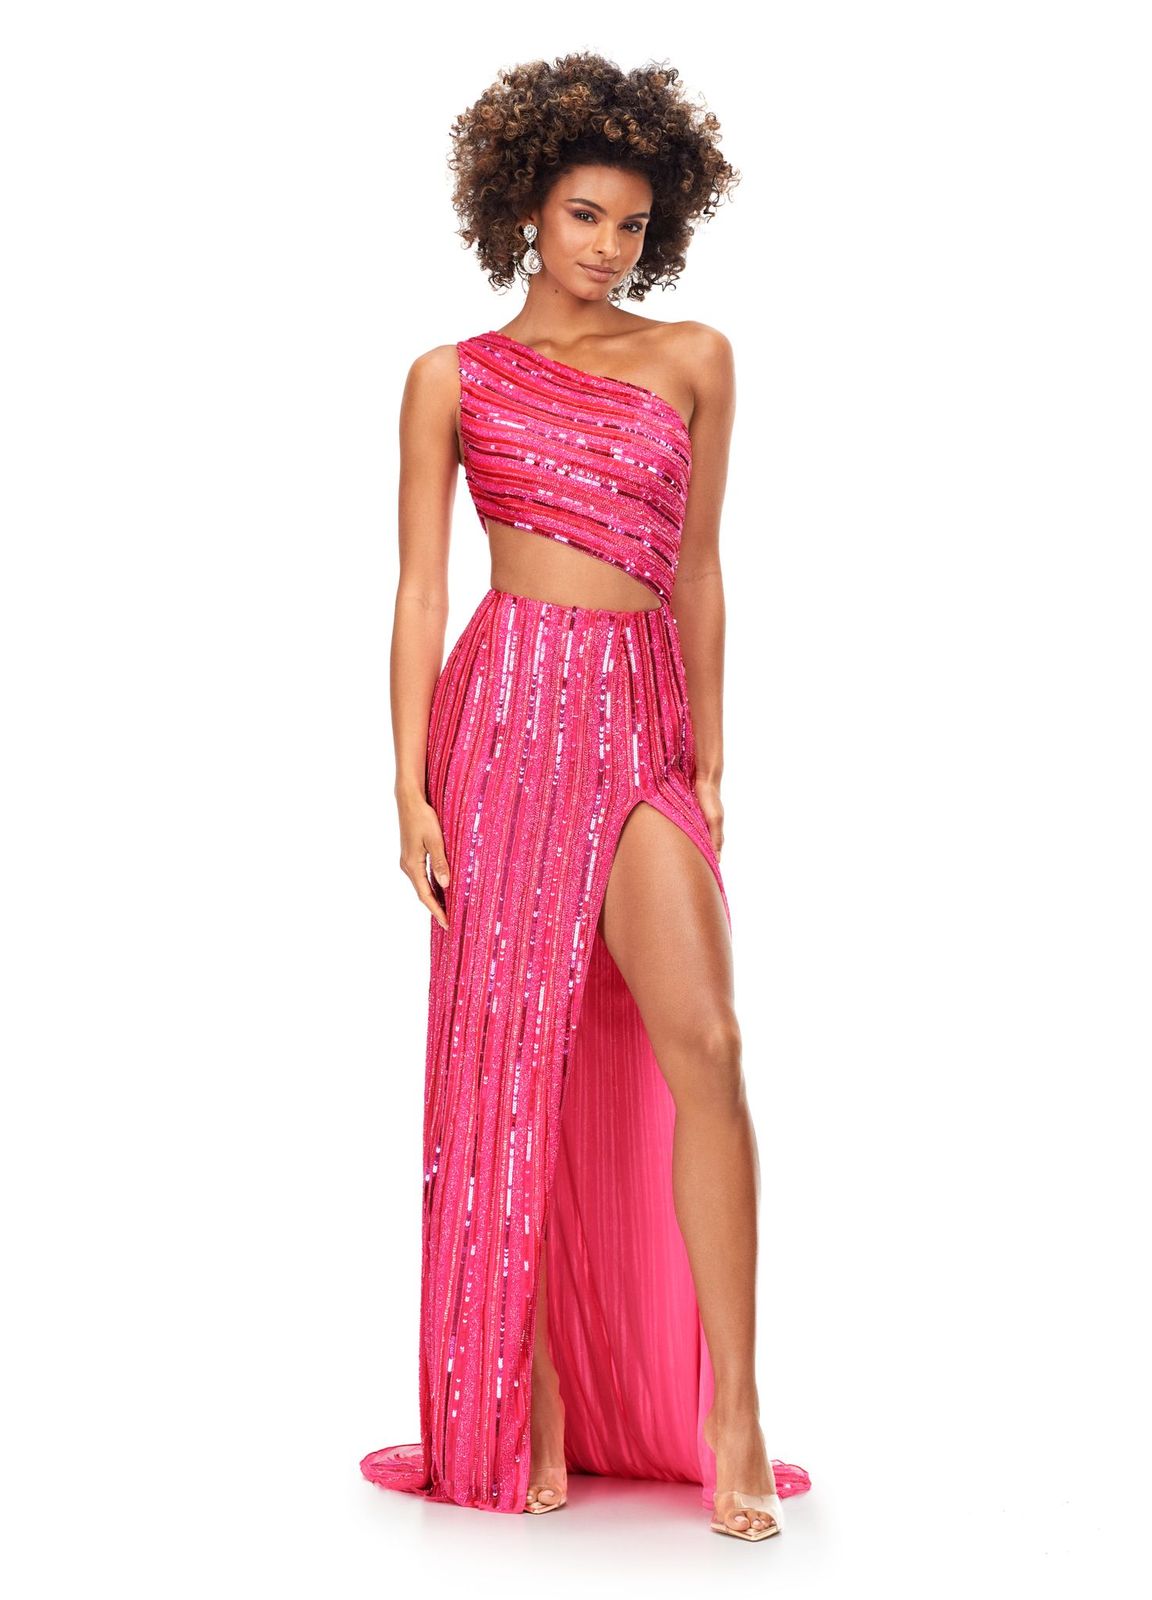 Ashley Lauren 11240 One Shoulder Sequin Prom Dress with Cut Out